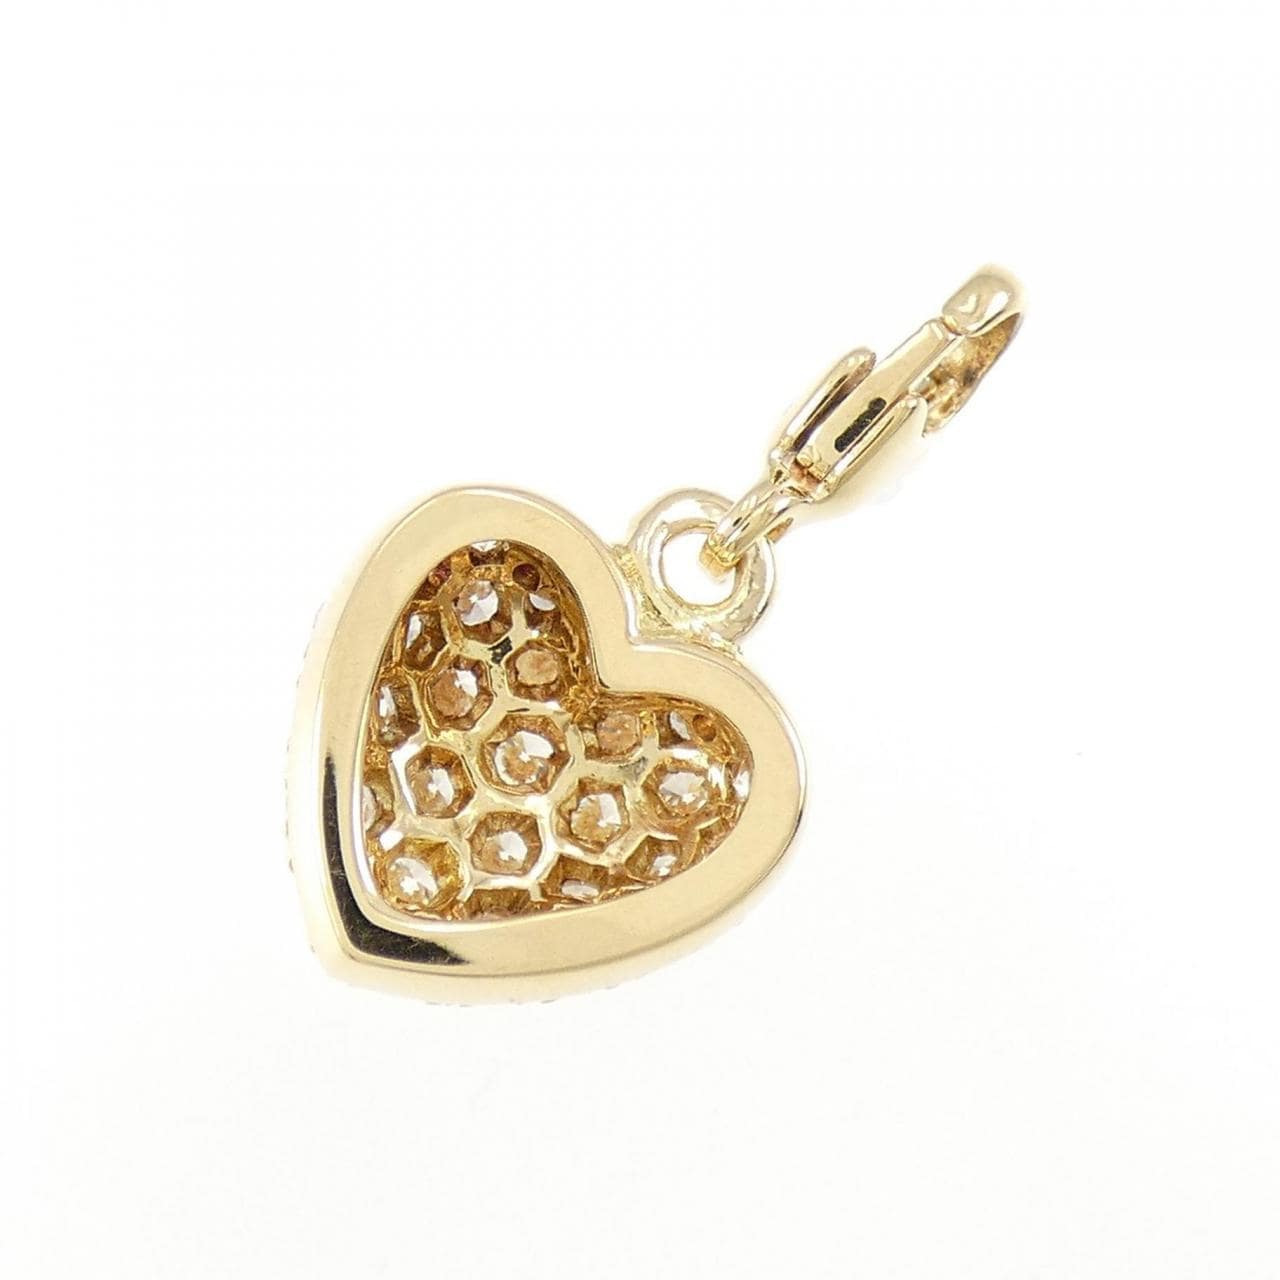 Cartier baby charm heart